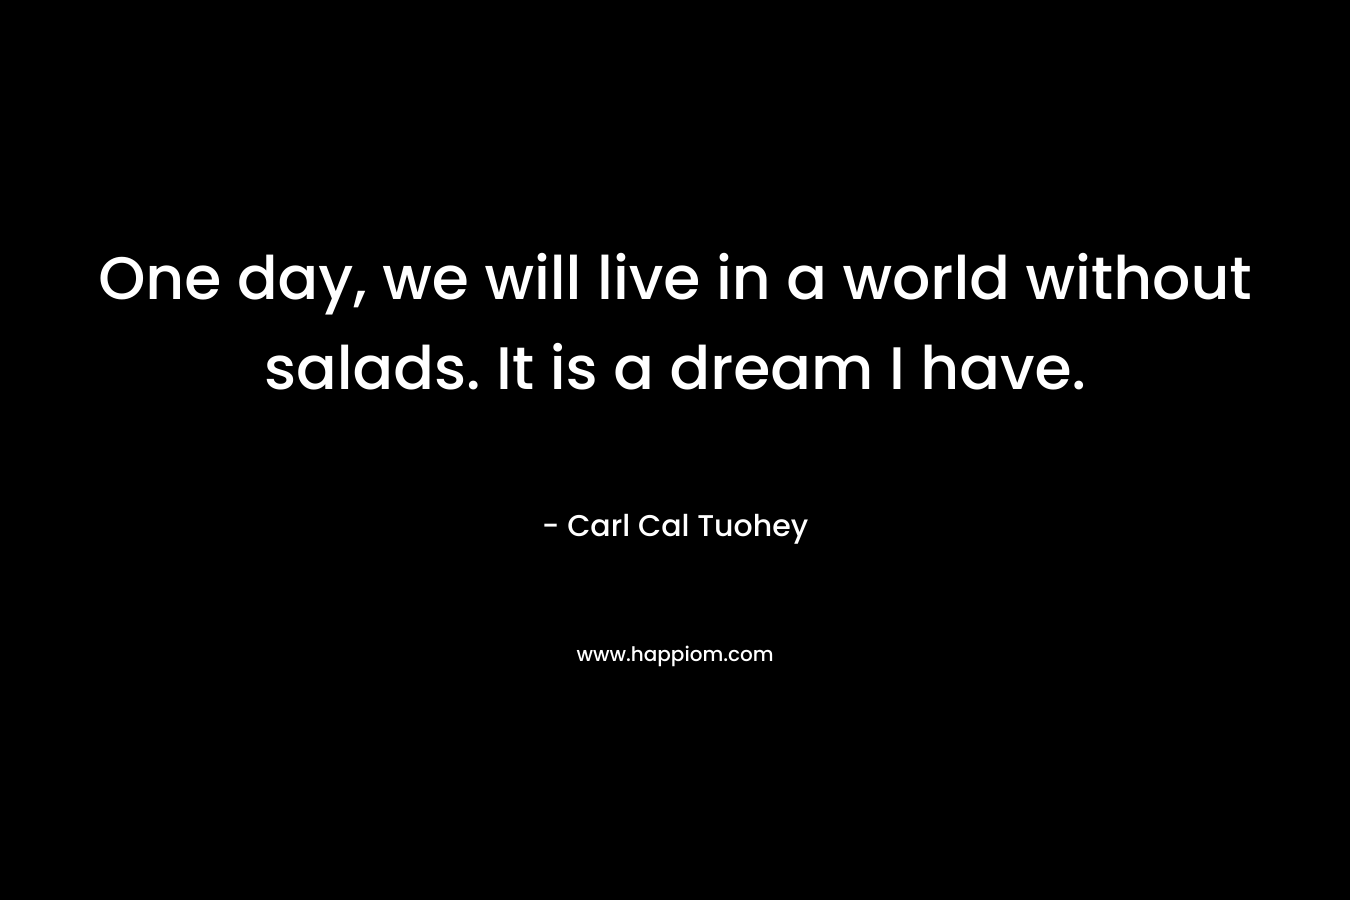 One day, we will live in a world without salads. It is a dream I have.